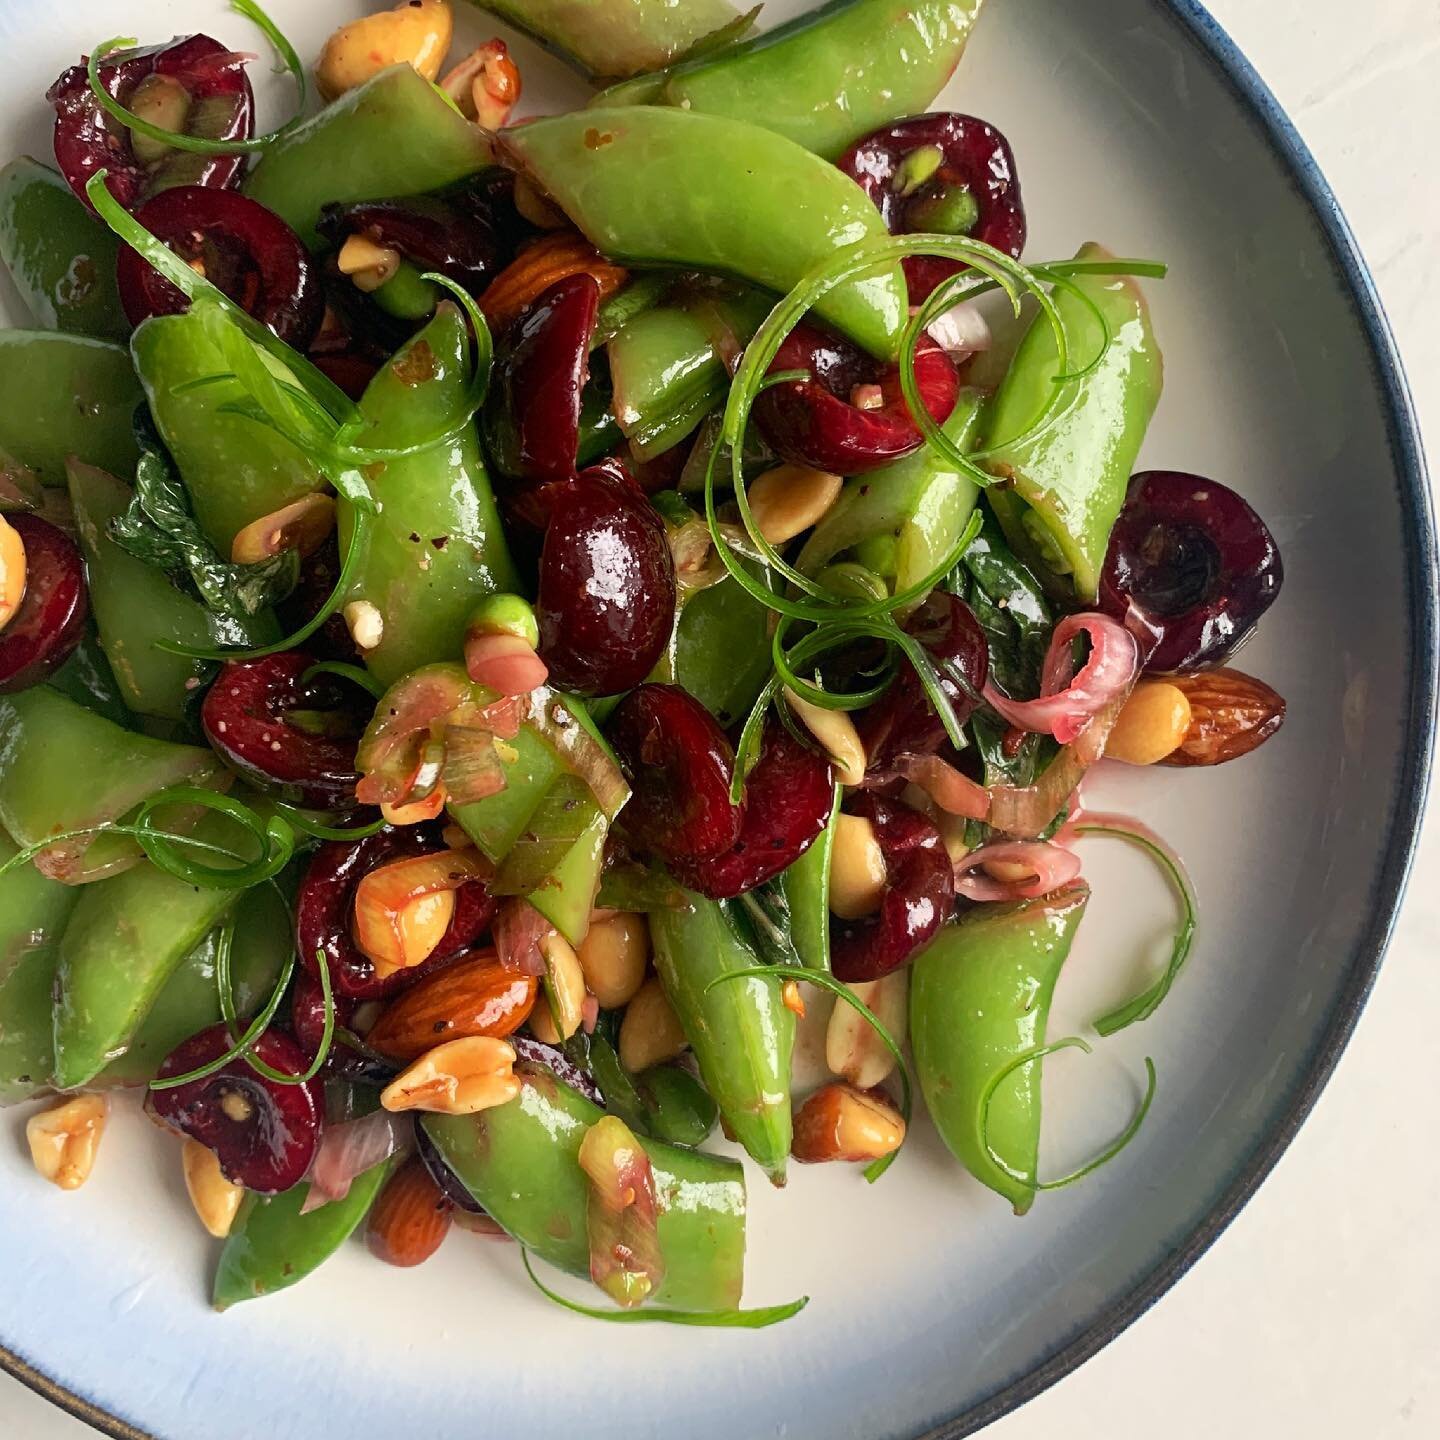 [inspired by] @jj__mc&rsquo;s sugar snap peas with pickled cherries and peanuts from #sixseasons. Thanks to @waldingfieldfarmct for the produce!